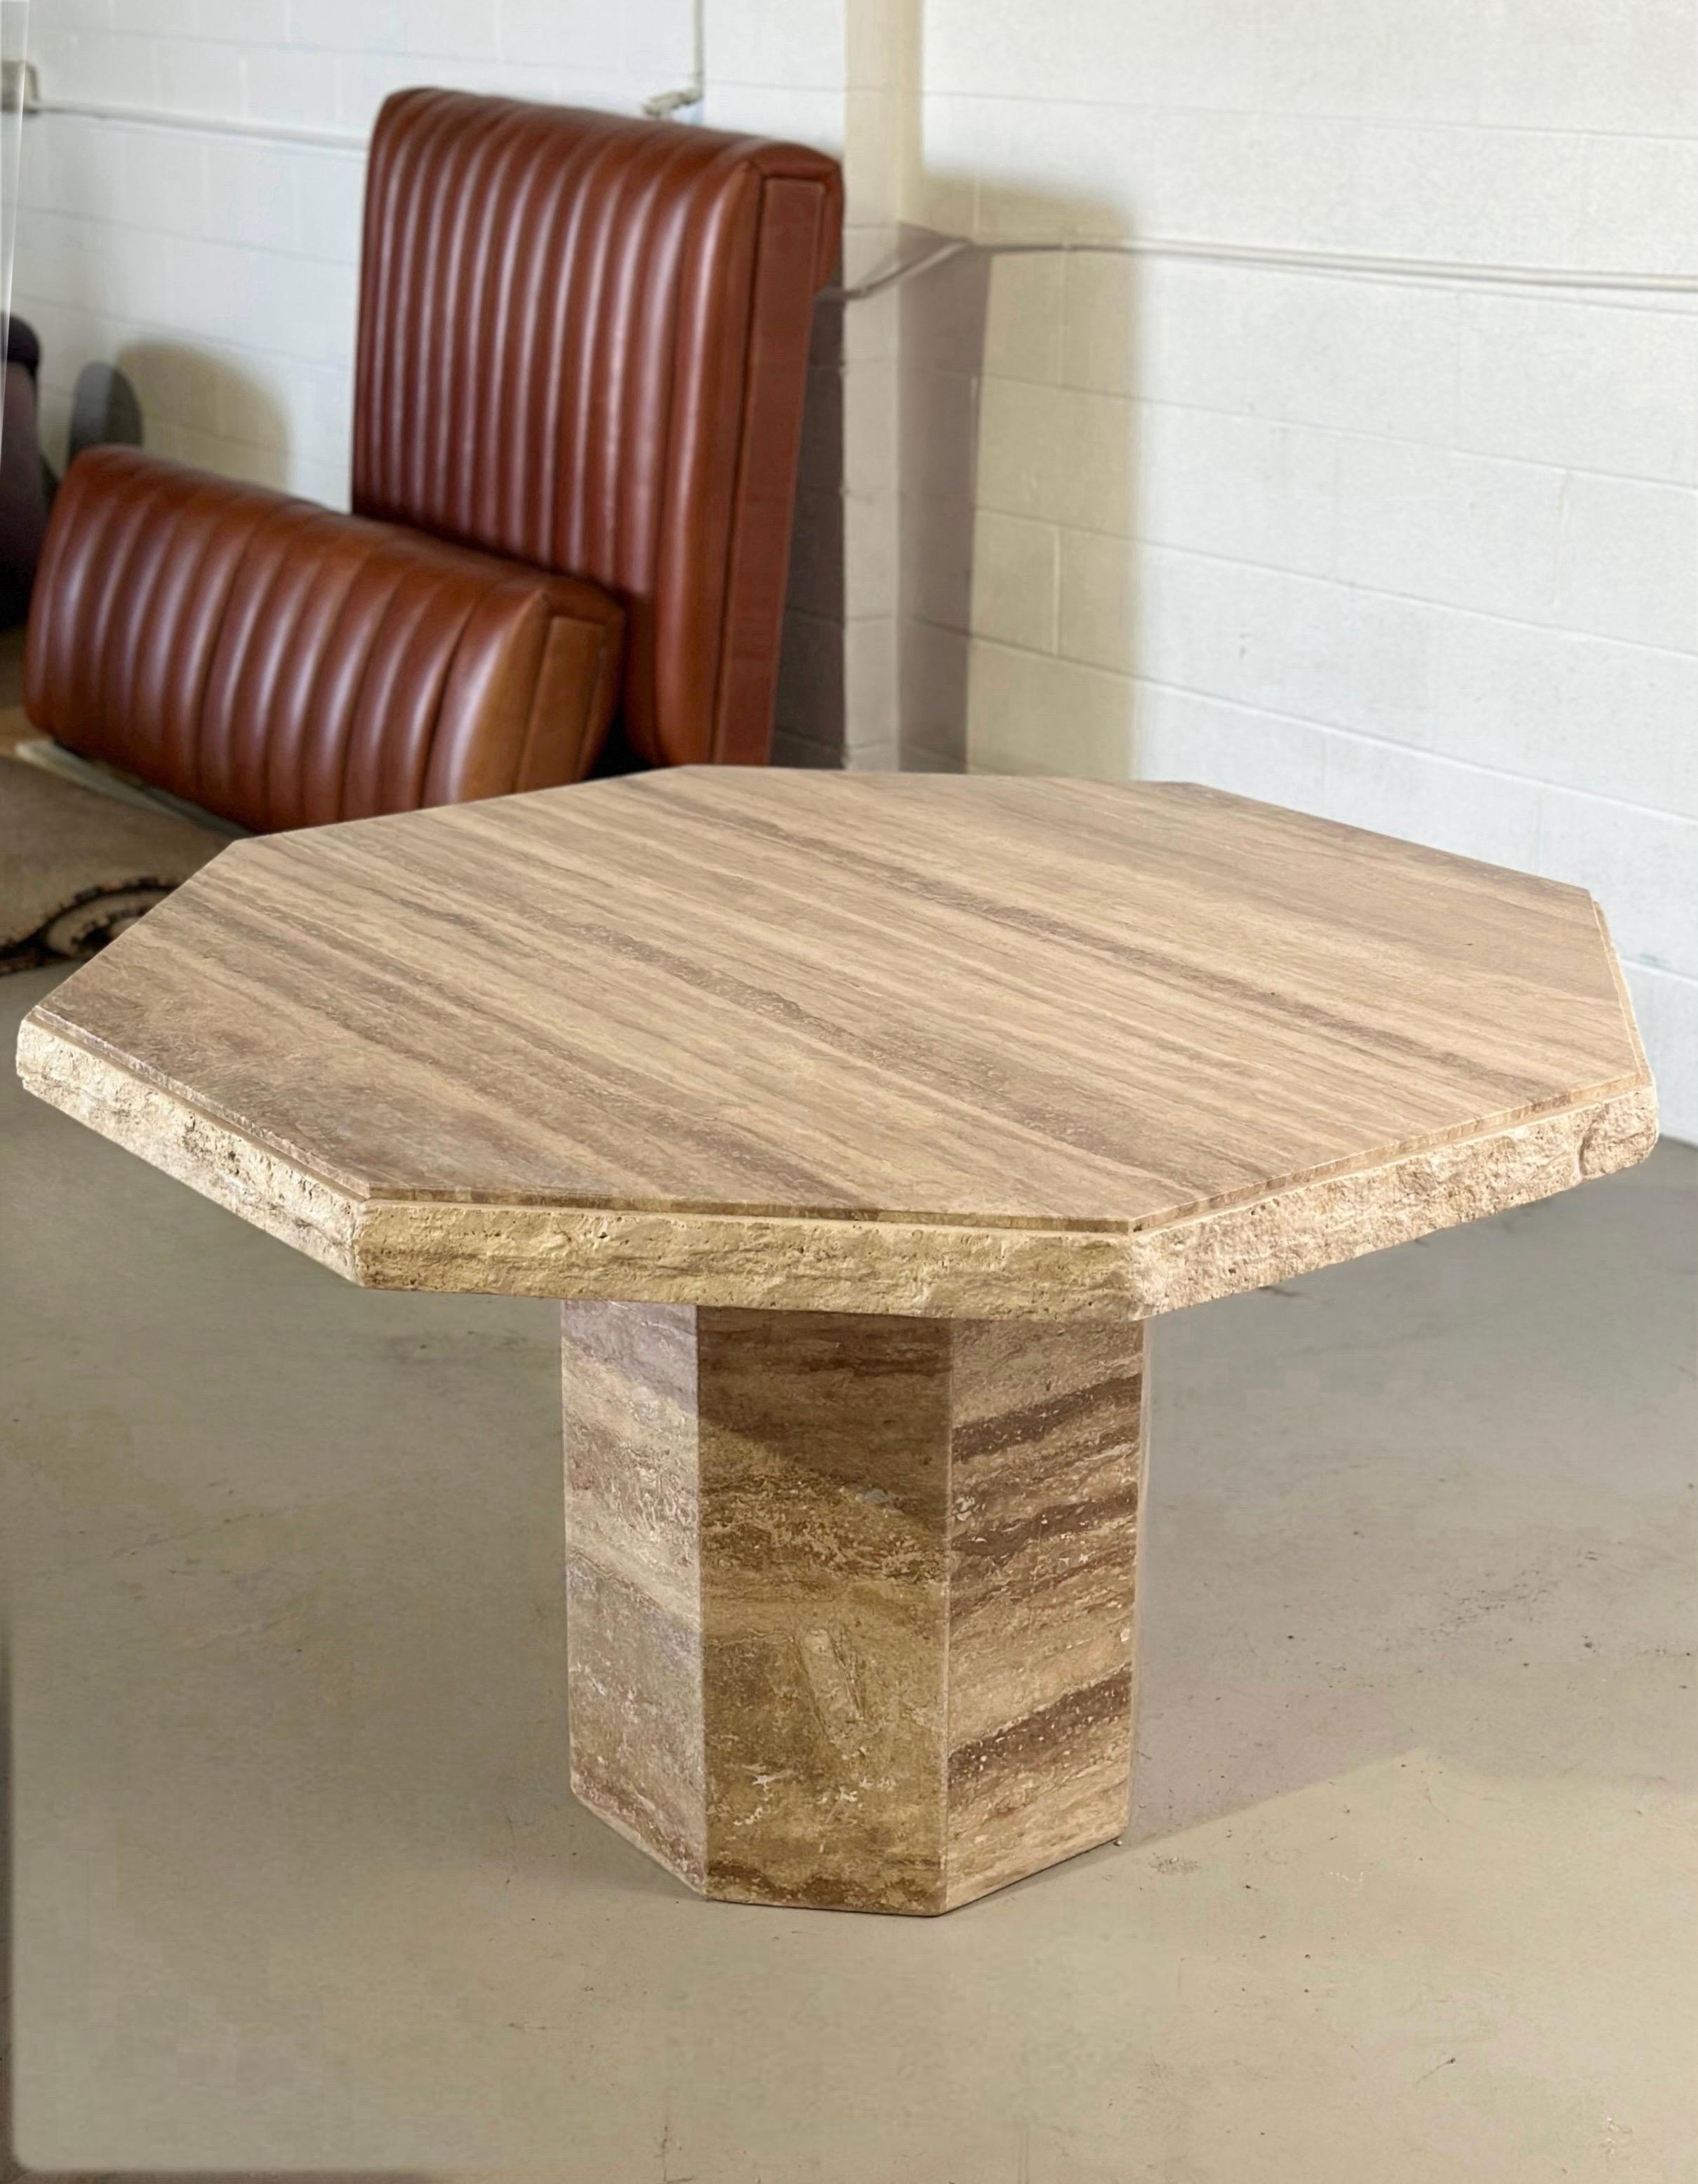 We are very pleased to offer a sophisticated and timeless travertine table, circa the 1970s.  The intricate veining of the travertine adds unparalleled beauty and depth, making it a unique masterpiece.  The table boasts an octagonal top, masterfully